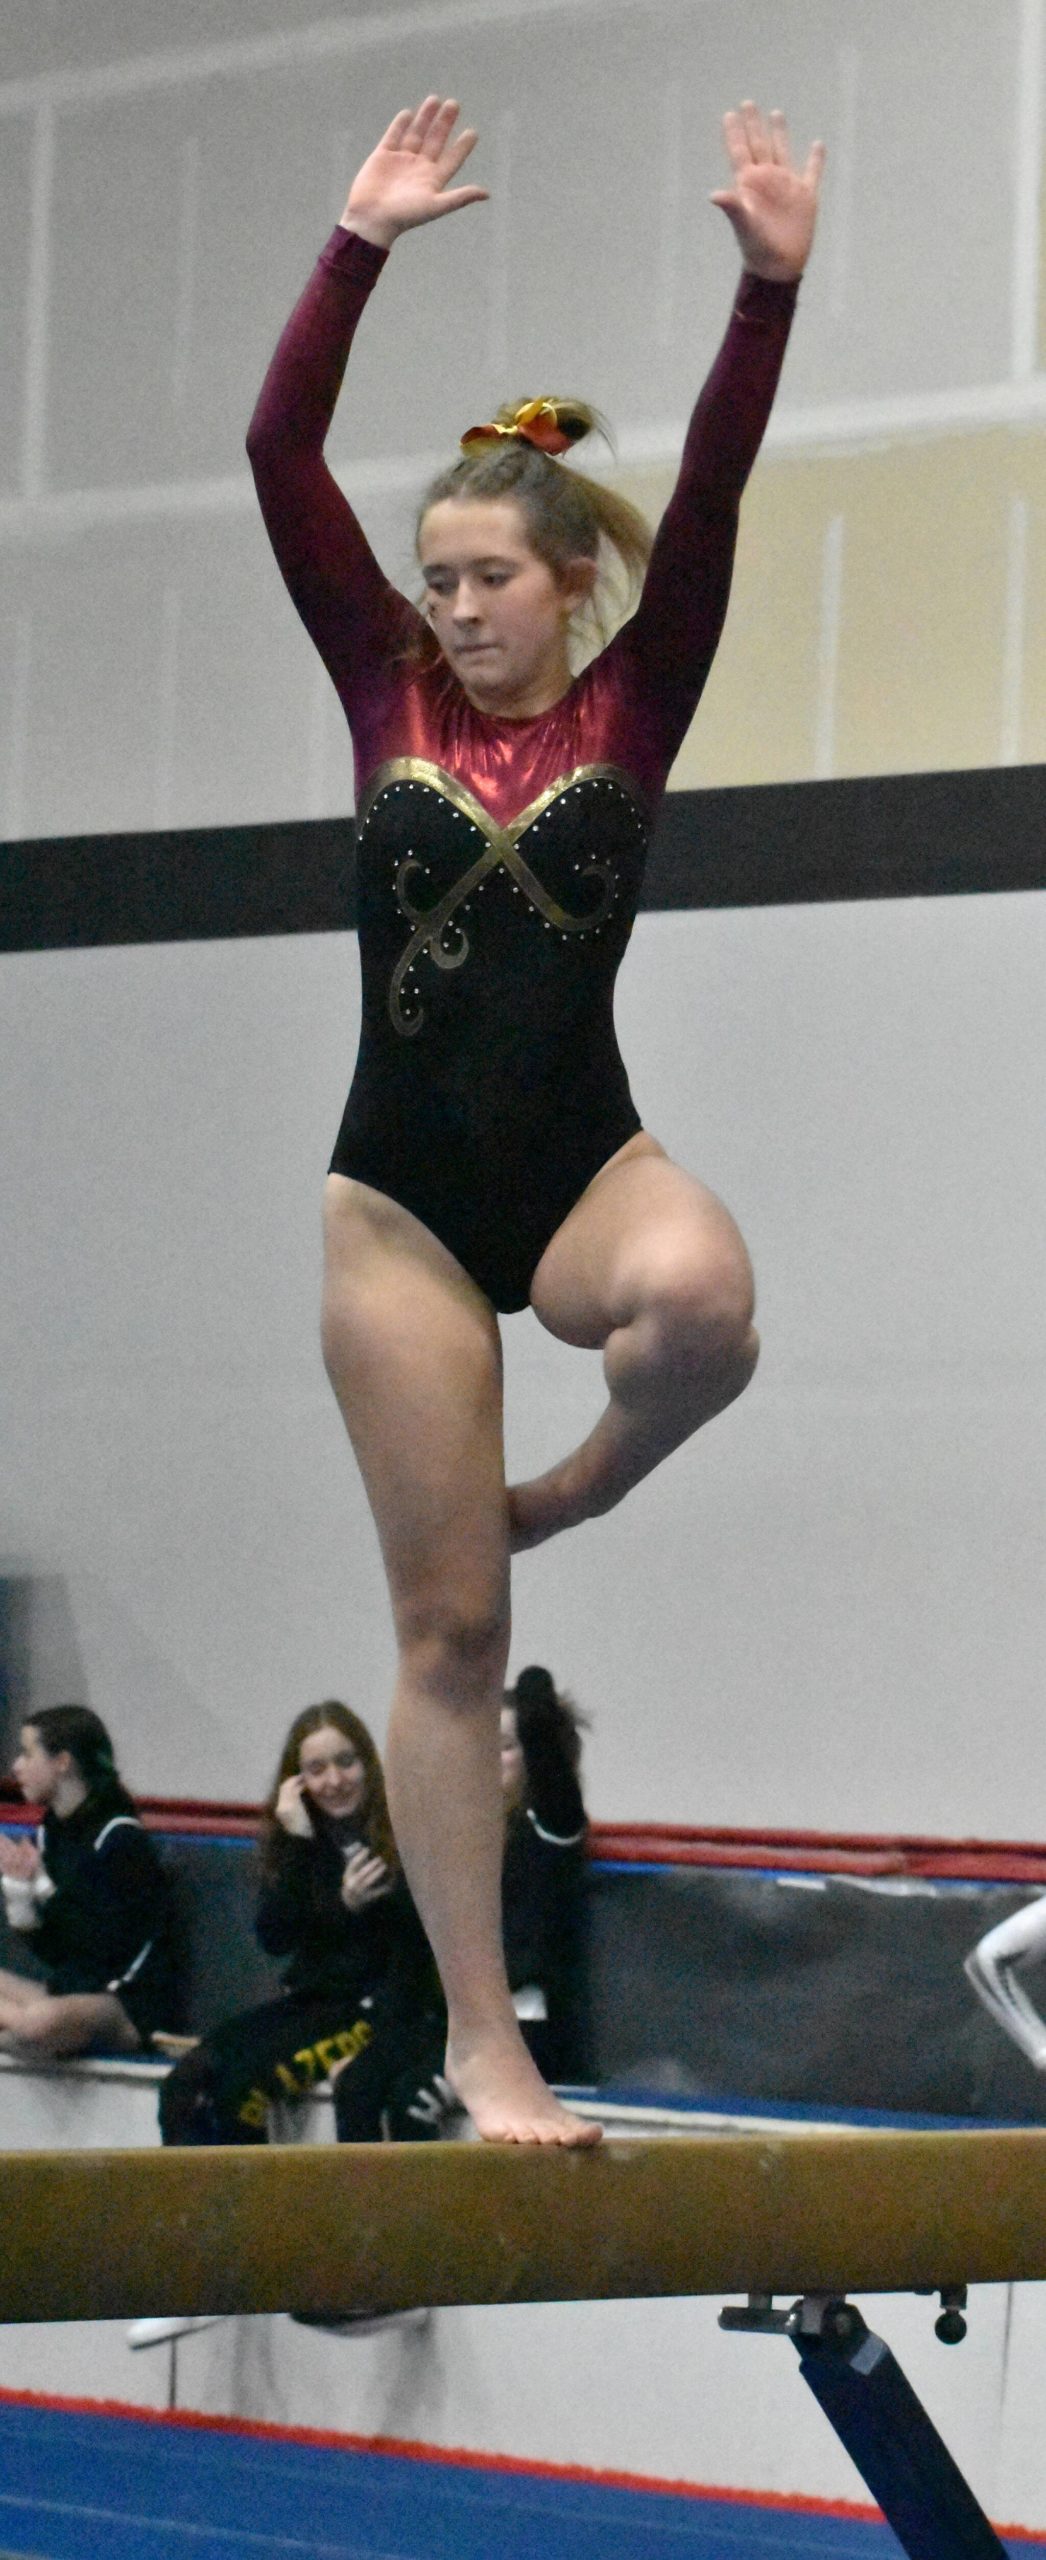 Pictured is Aislinn Binder on beam. Photo by Kevin Hanson